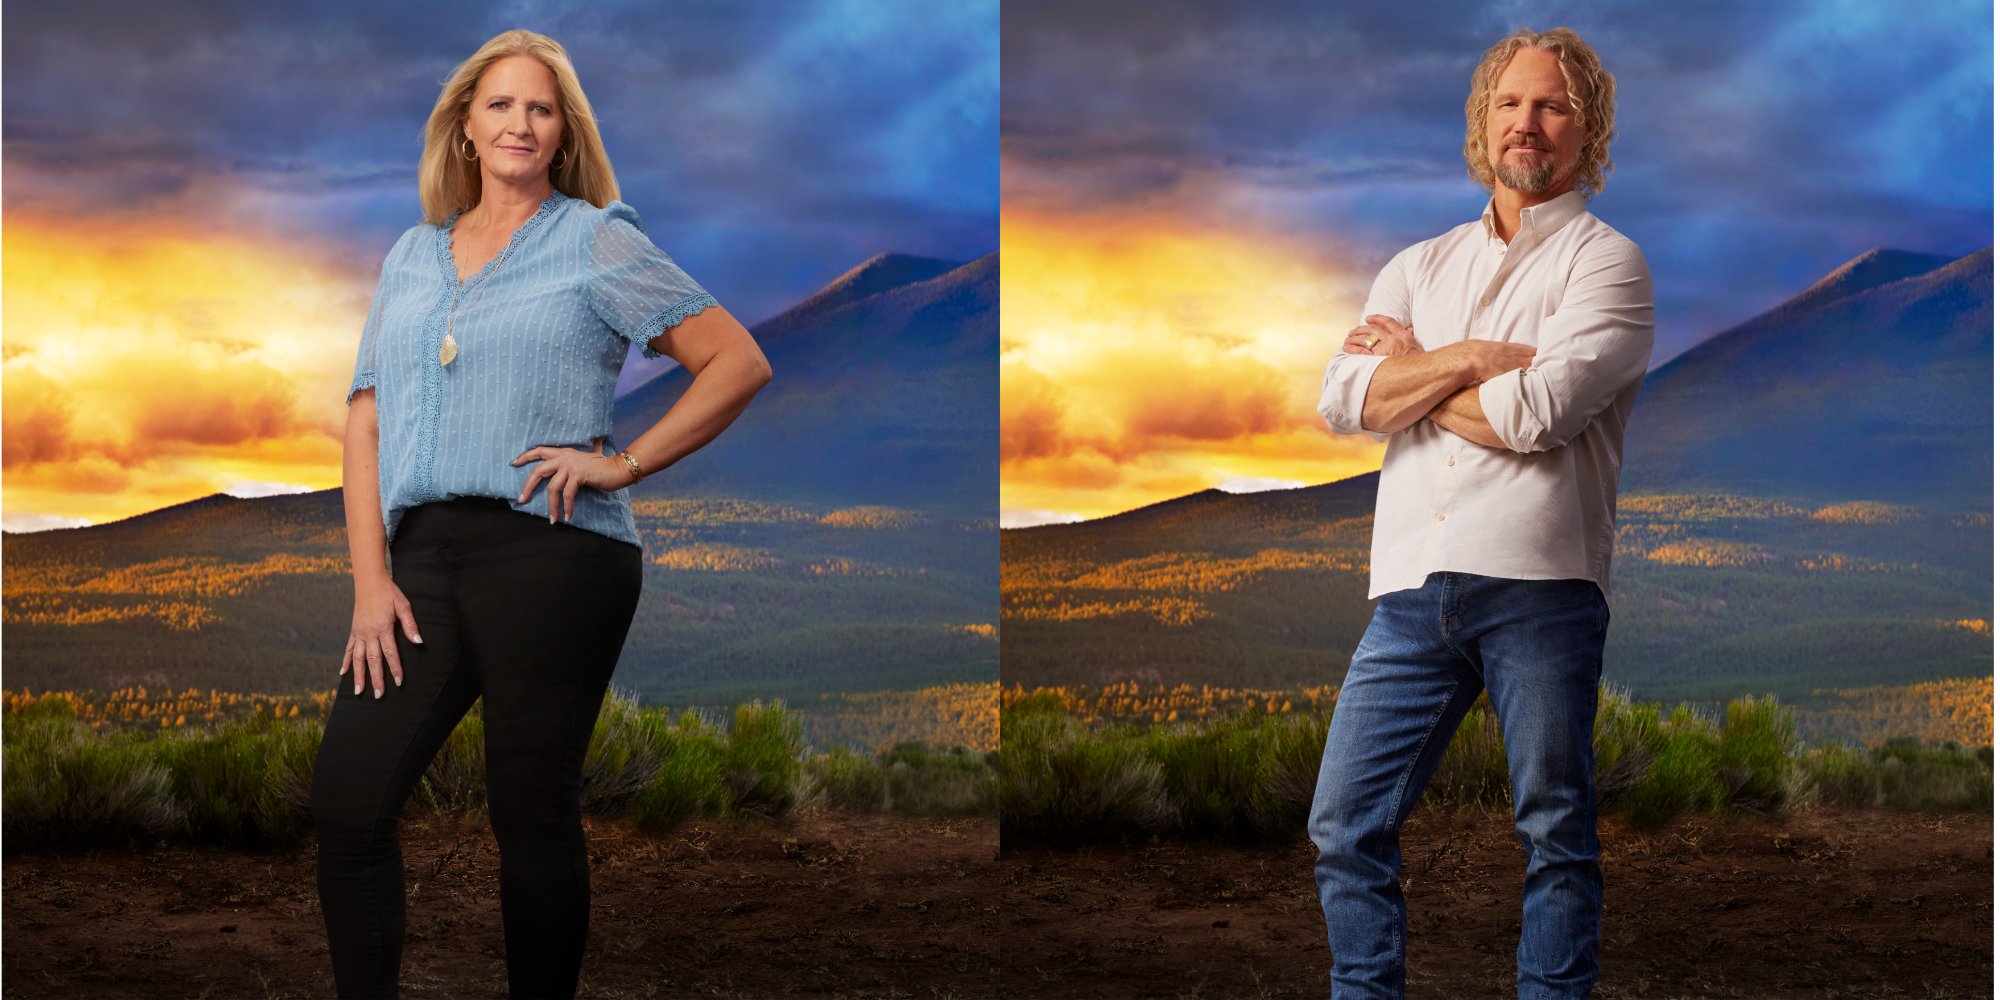 Christine and Kody Brown in side by side promotional images for season 17 of 'Sister Wives.'